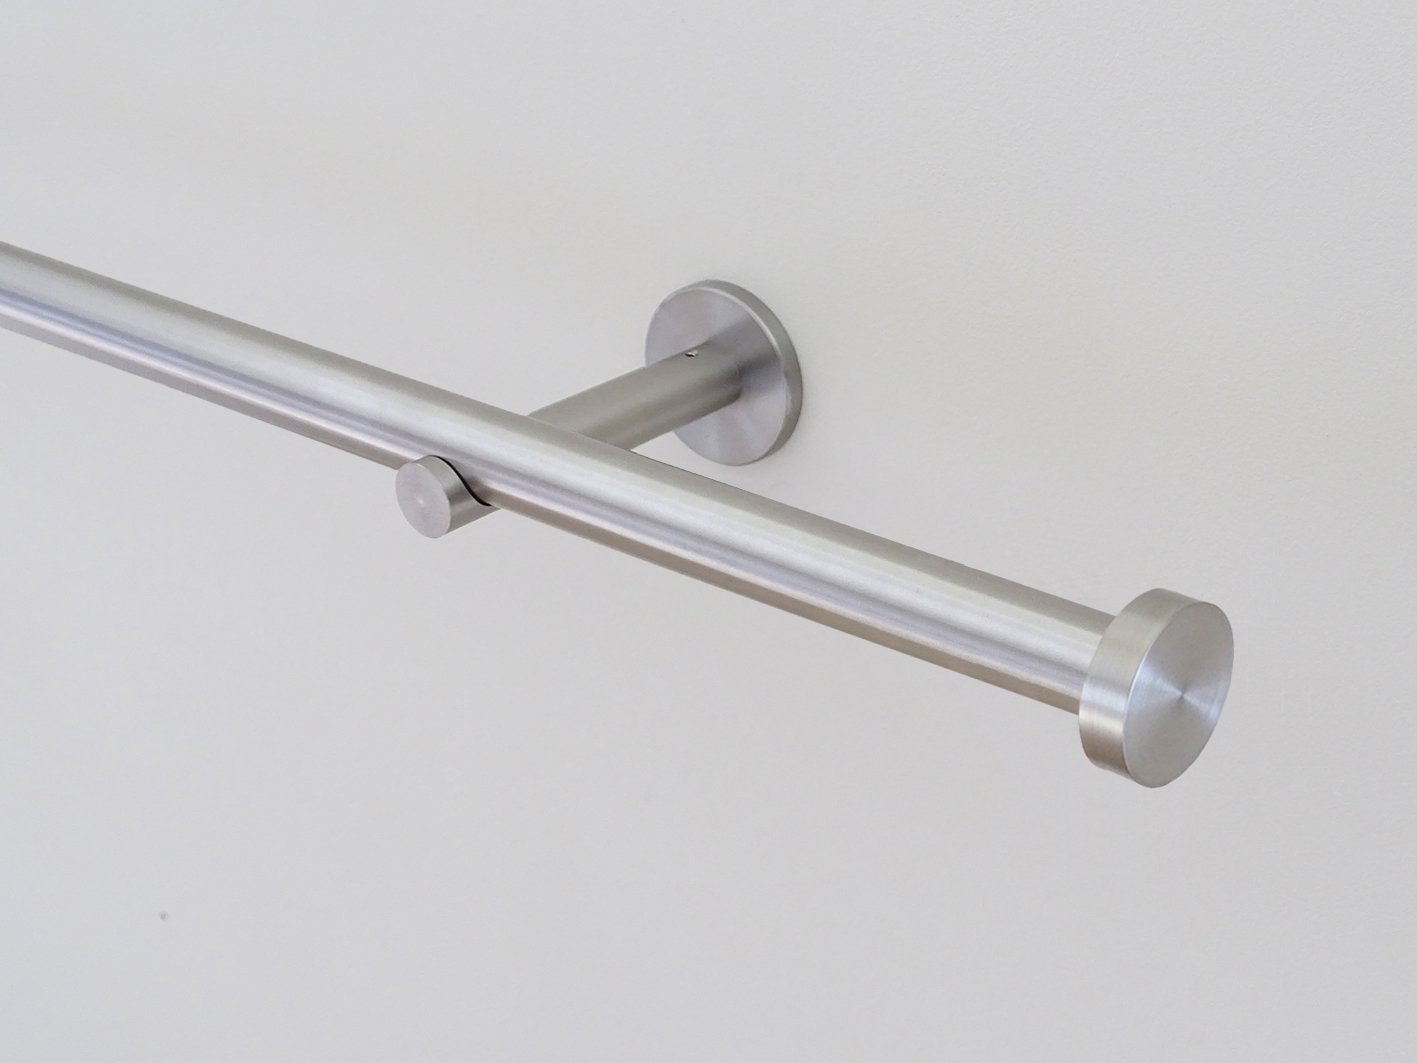 19mm dia. stainless steel curtain pole set with mini disc finials